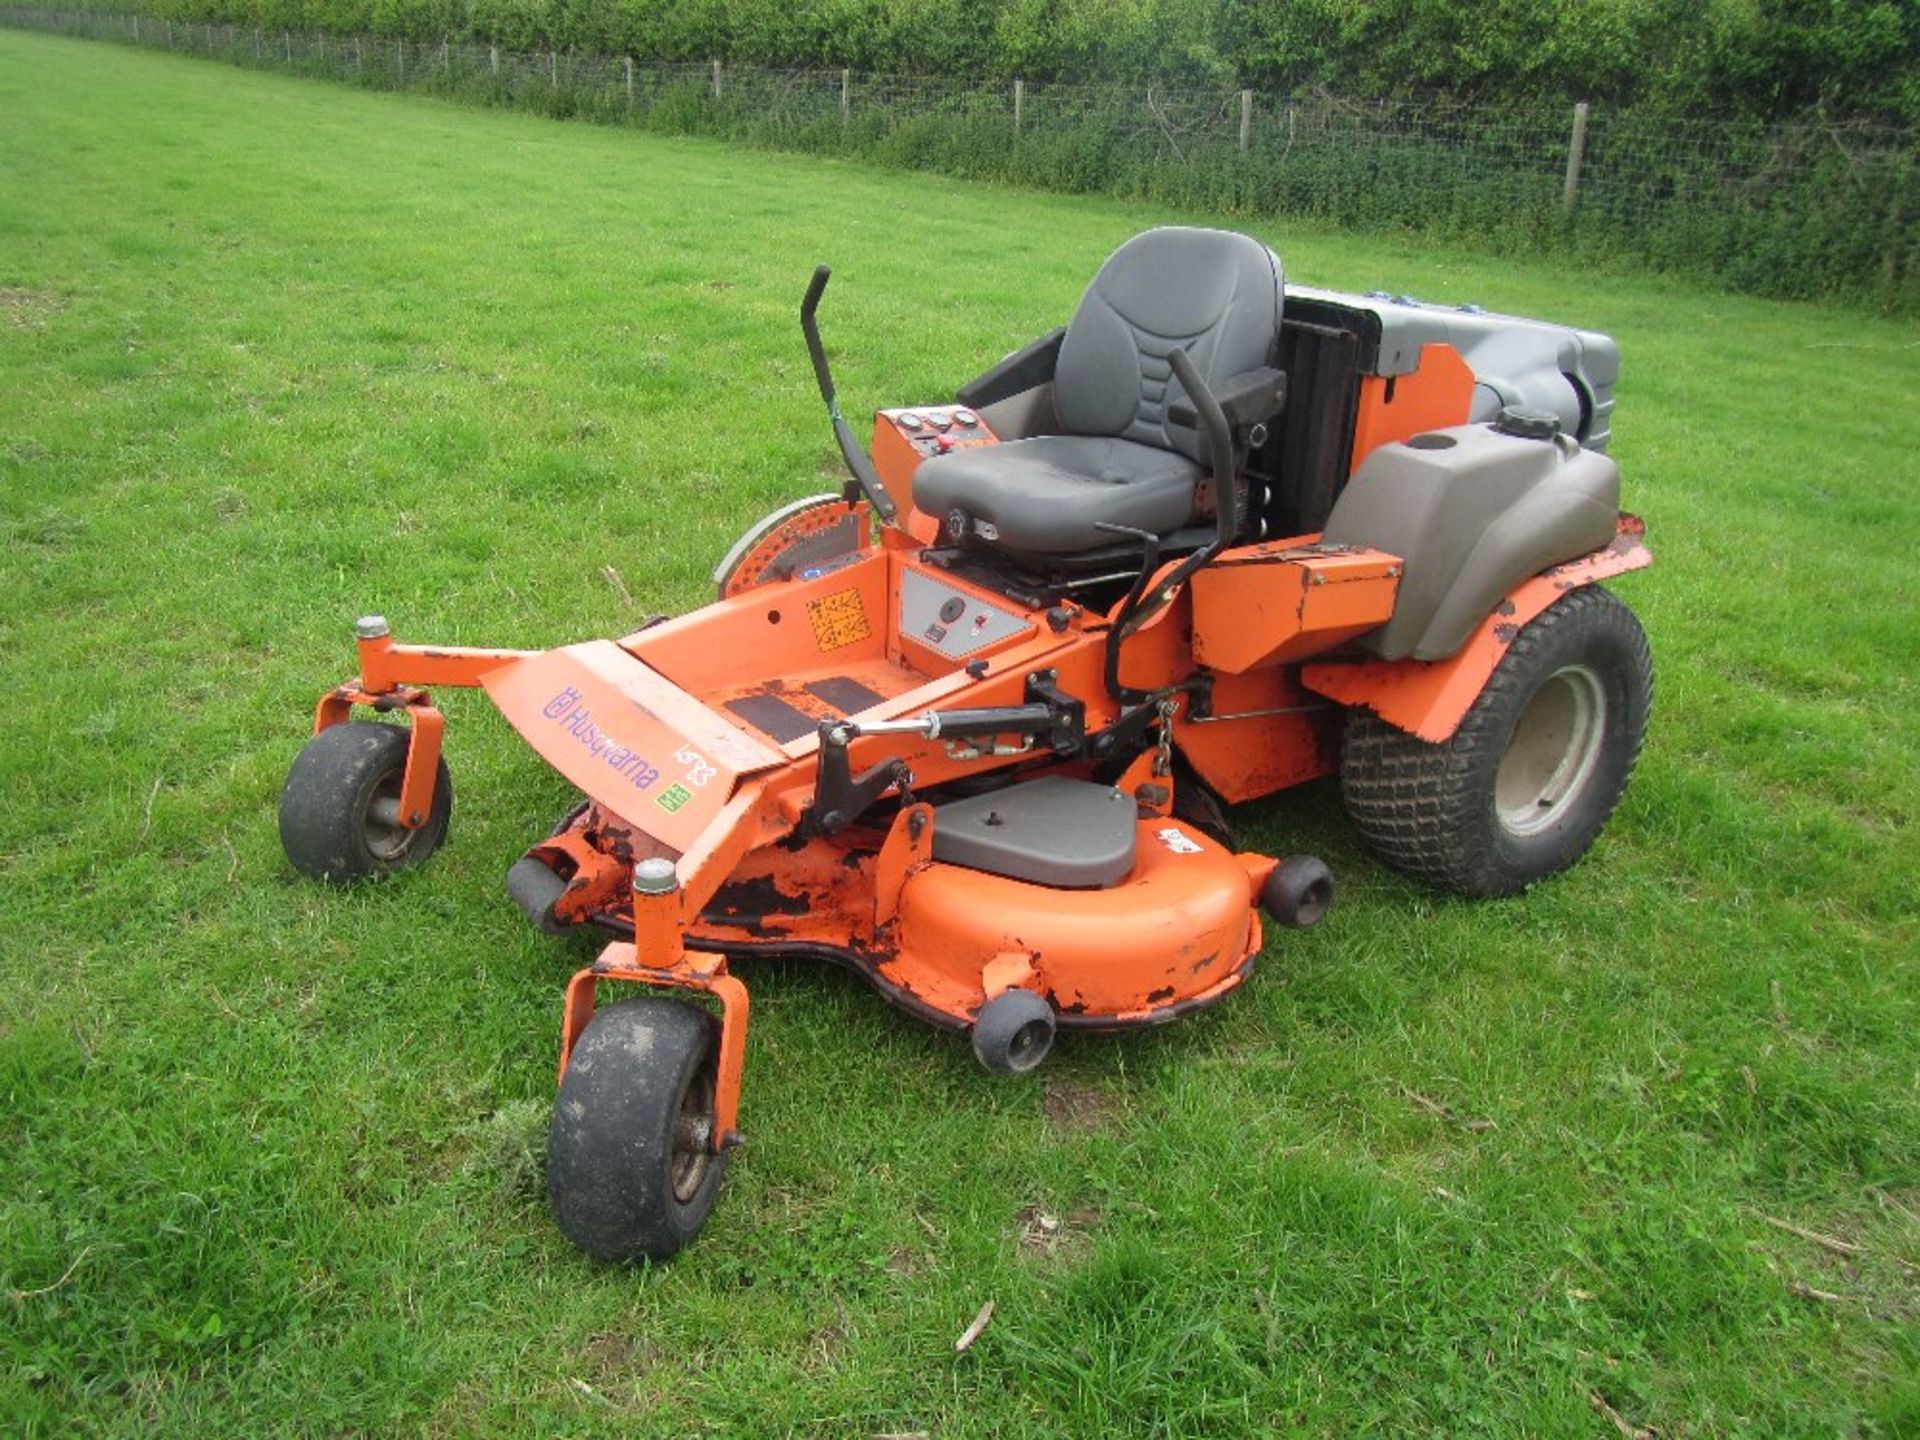 Husqvarna commercial BZ34 ride-on diesel mower with 5ft cutting deck